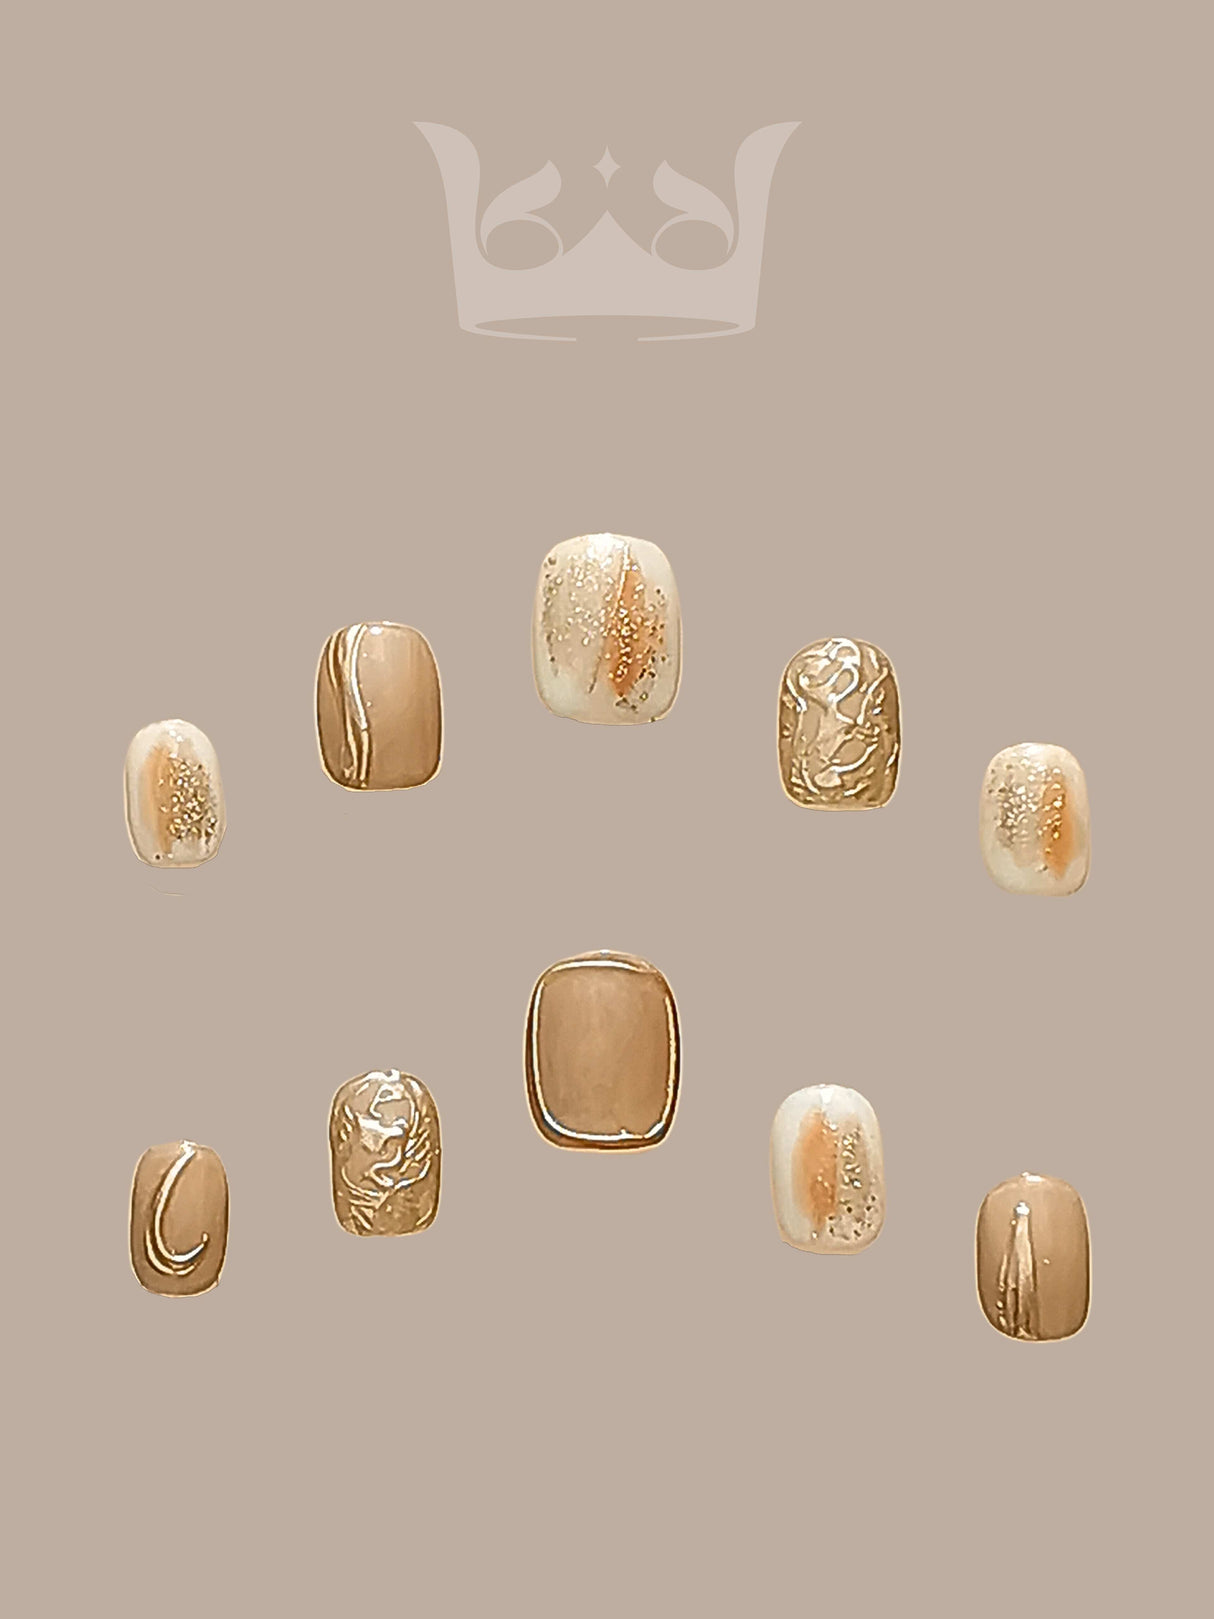 These press-on nails have a minimalist design and gold accents that complement a variety of outfits. They feature a luxurious aesthetic with gold foil, glitter, and marble-like effects.